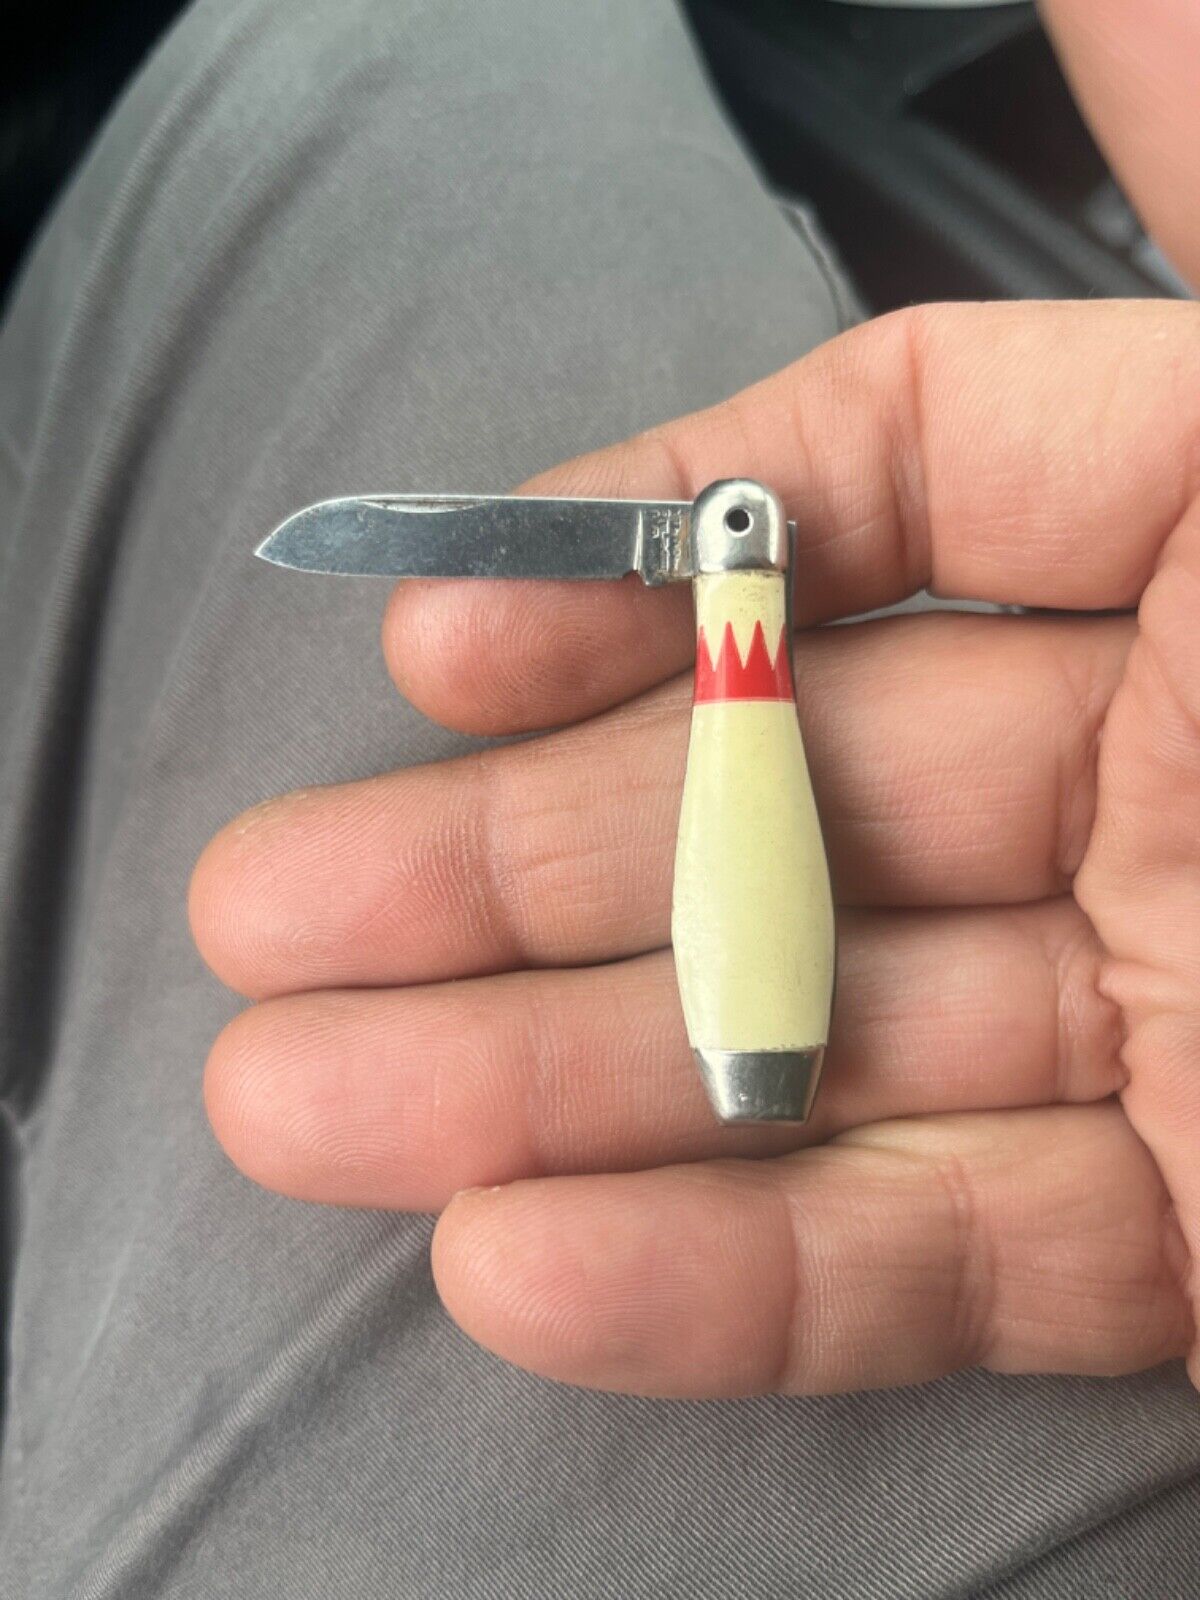 Imperial antique bowling pin pocket knife